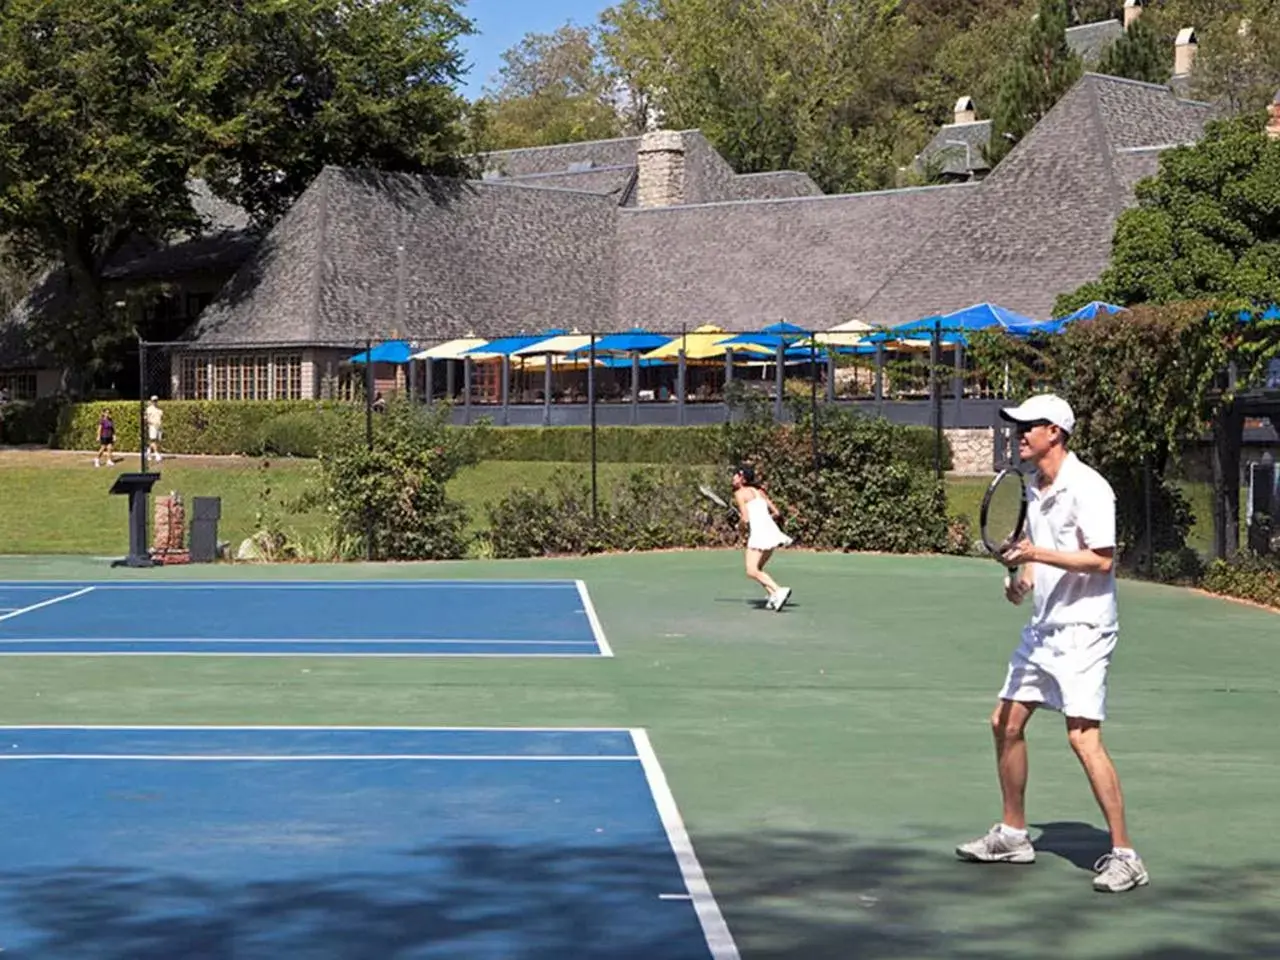 Tennis court, Other Activities in UCLA Lake Arrowhead Lodge